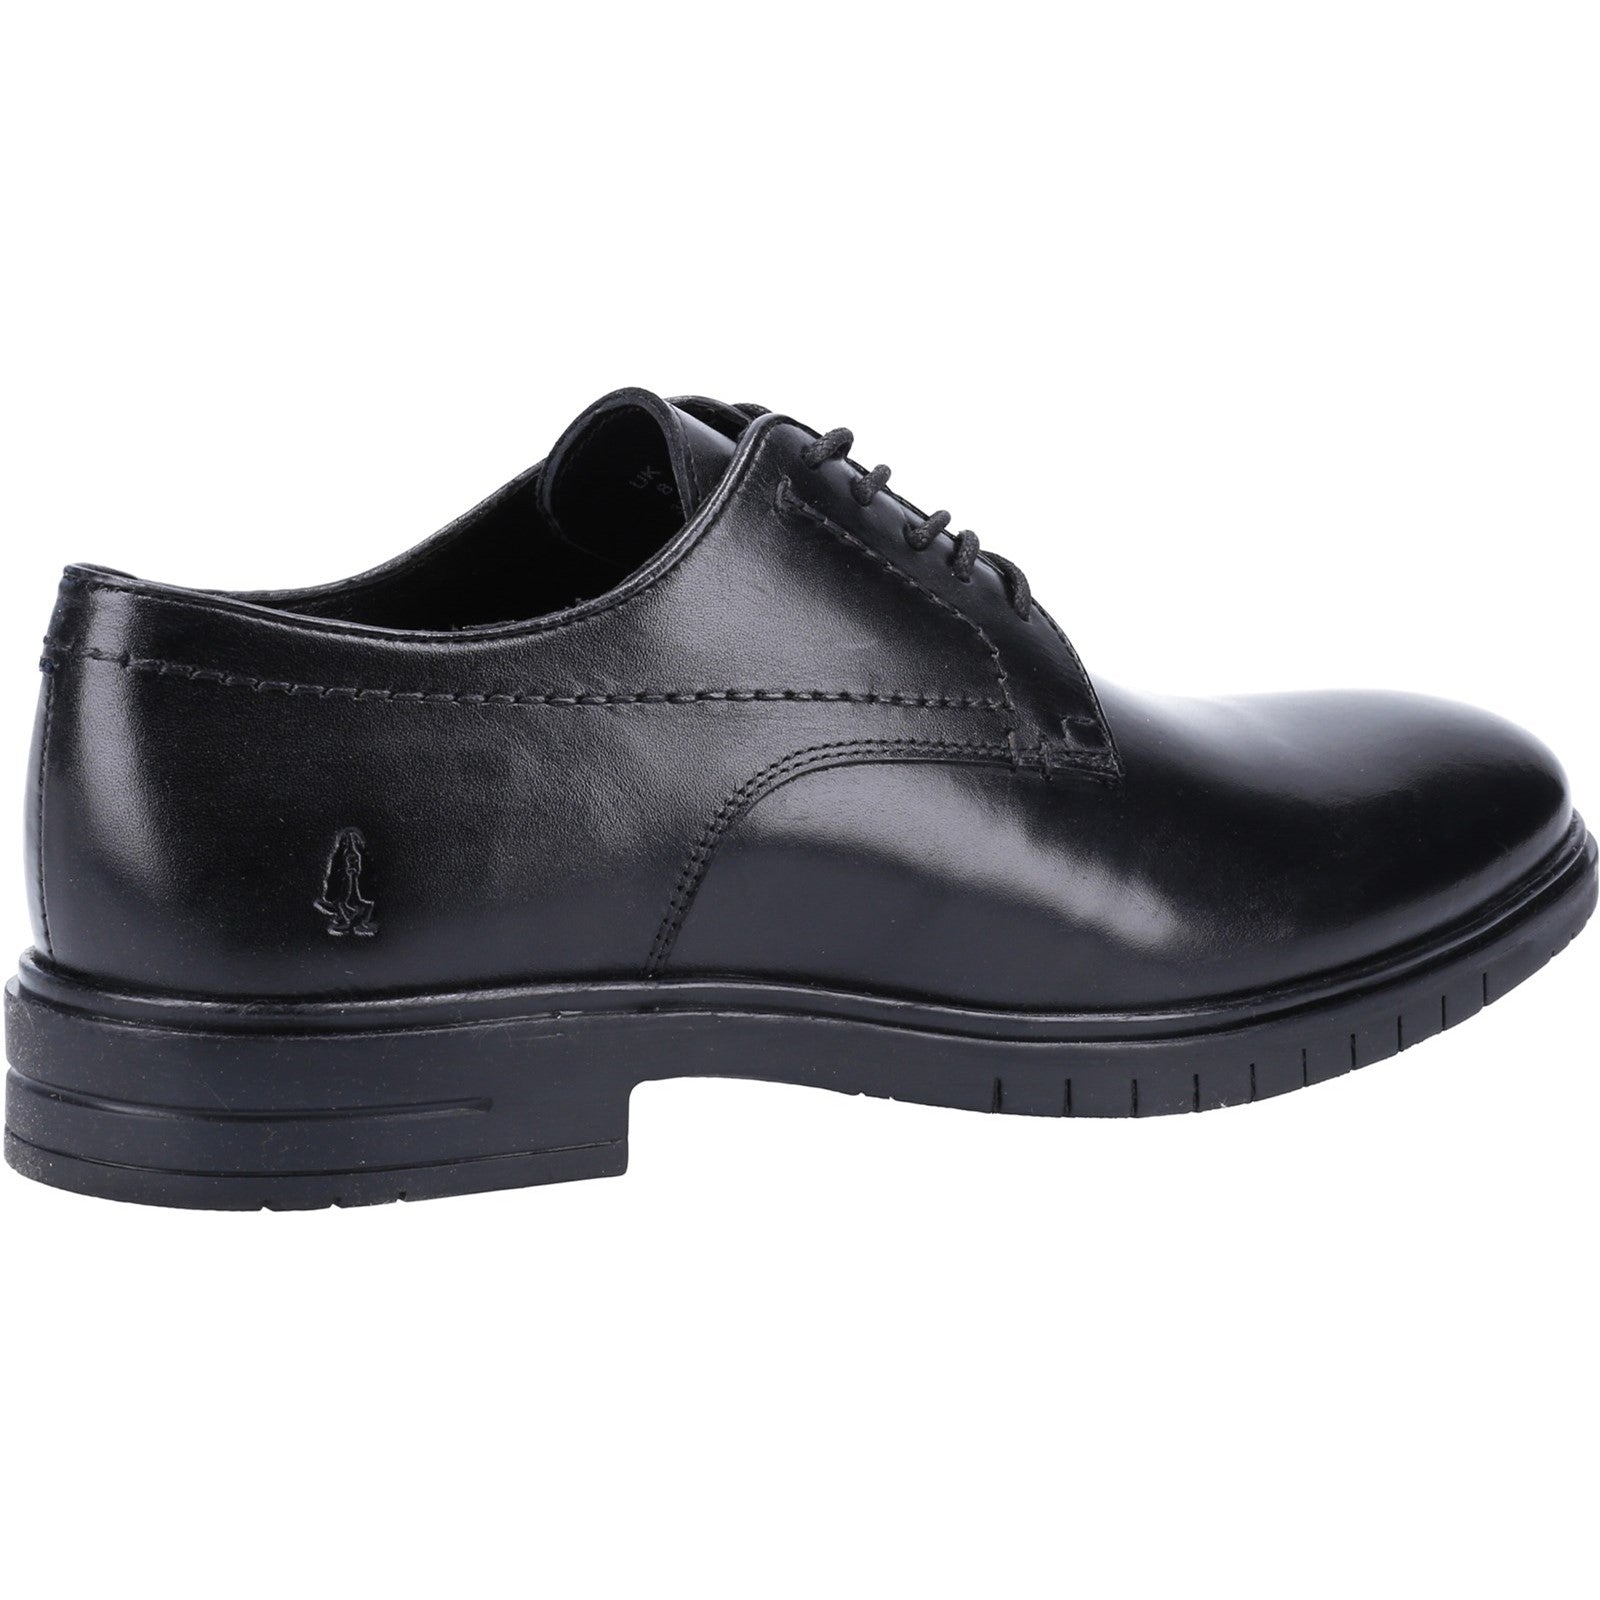 Hush Puppies Mens Sterling Leather Shoes - Black